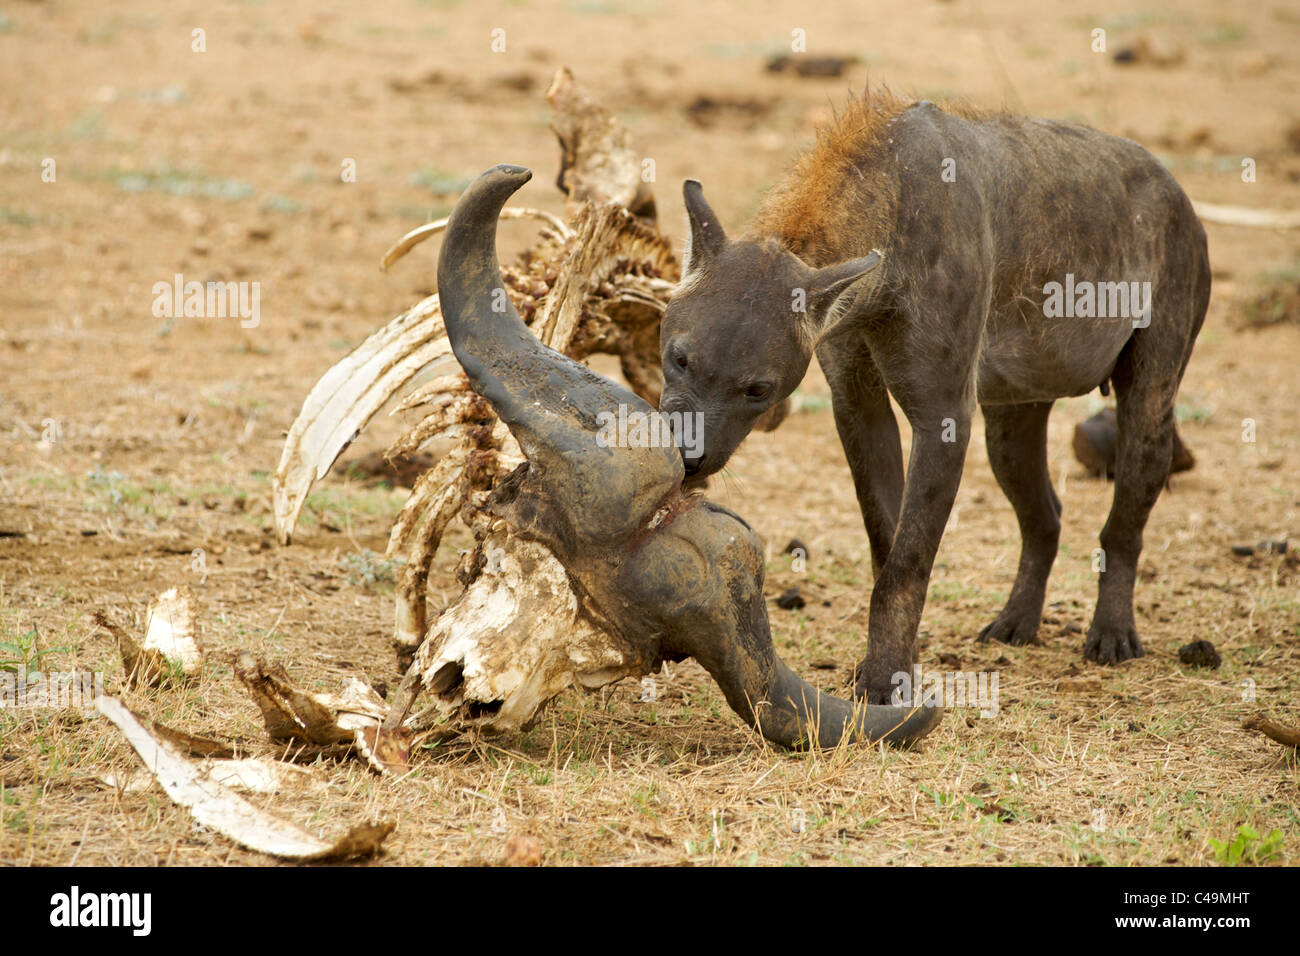 Spotted hyena (Crocuta crocuta) also known as laughing hyena at a buffalo carcass in the Kruger Park area of South Africa. Stock Photo